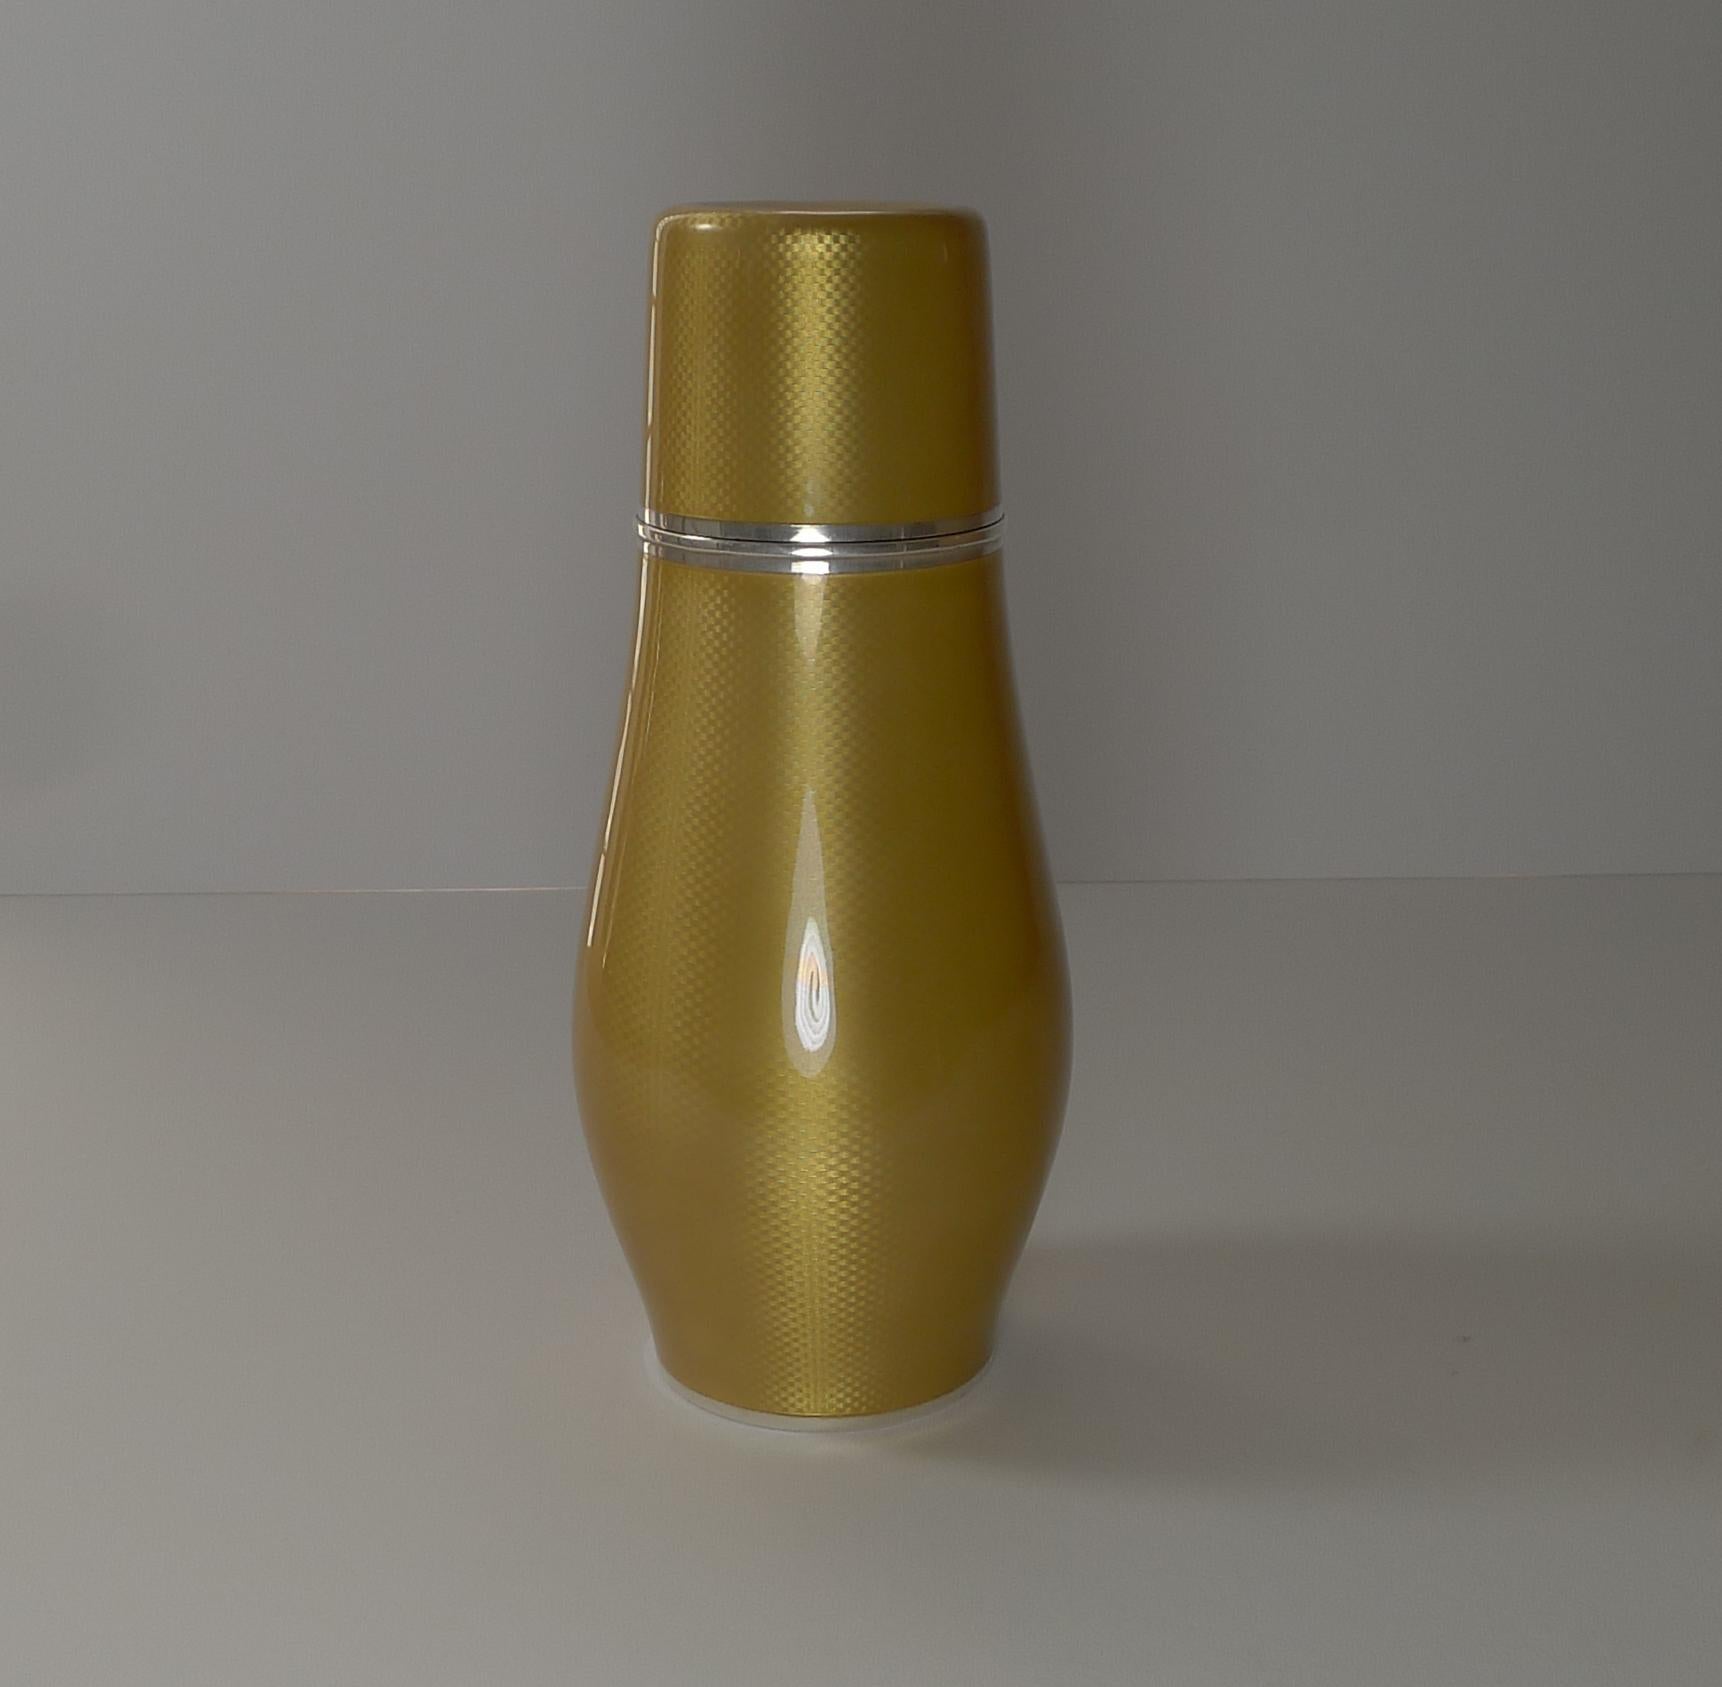 Not a cocktail shaker, a work of art by master Norwegian goldsmith's, David Andersen; certainly a rare and important piece of holloware for the David Andersen devotee or advanced barware collector.

We have never seen a cocktail shaker by this